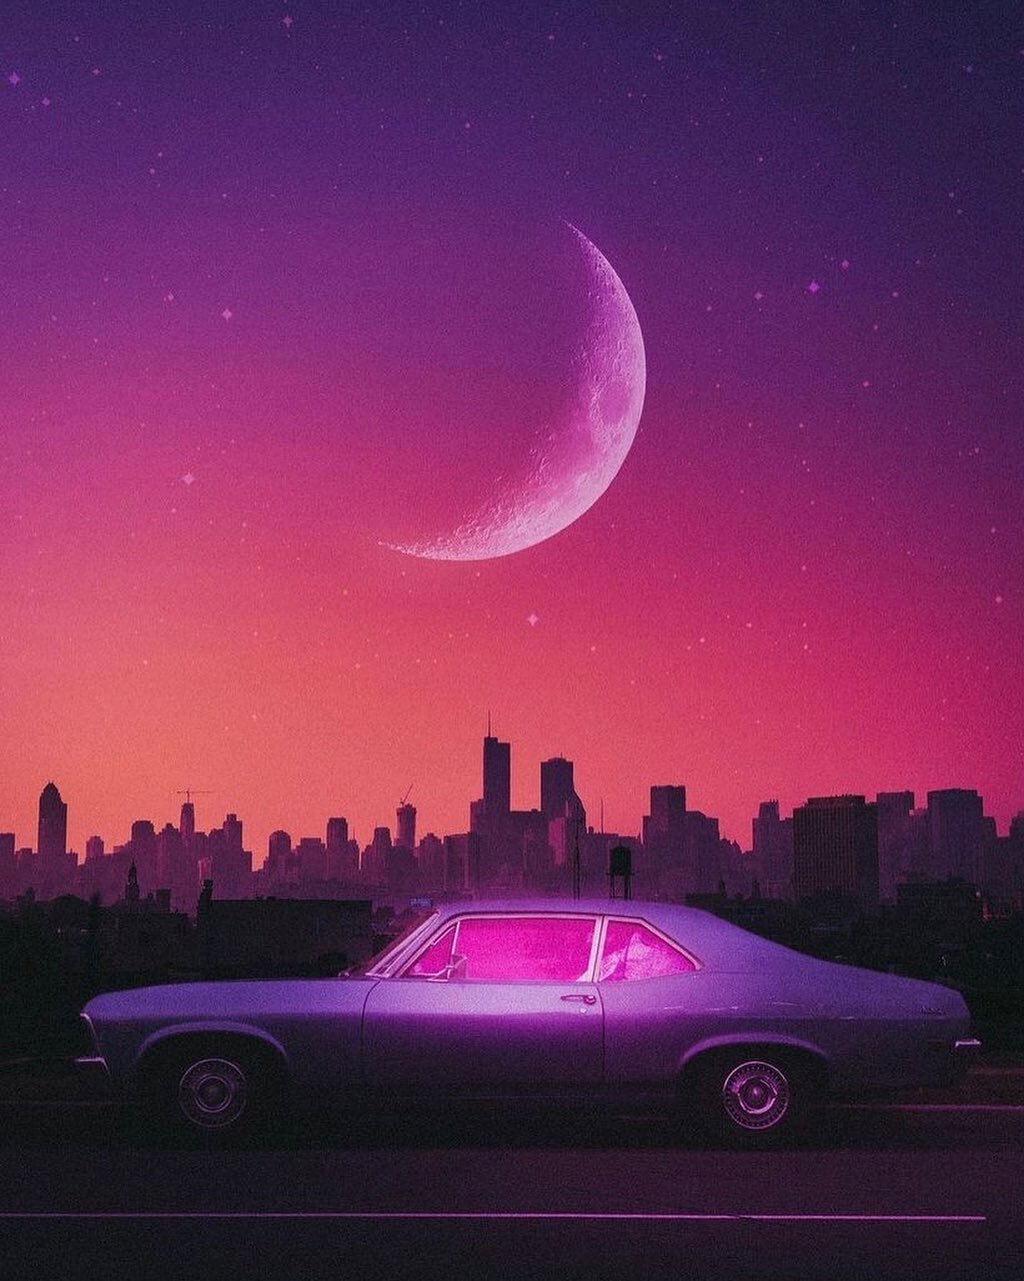 night time drive 🌙 EP for this project is dropping tomorrow - get ready!! 🚙